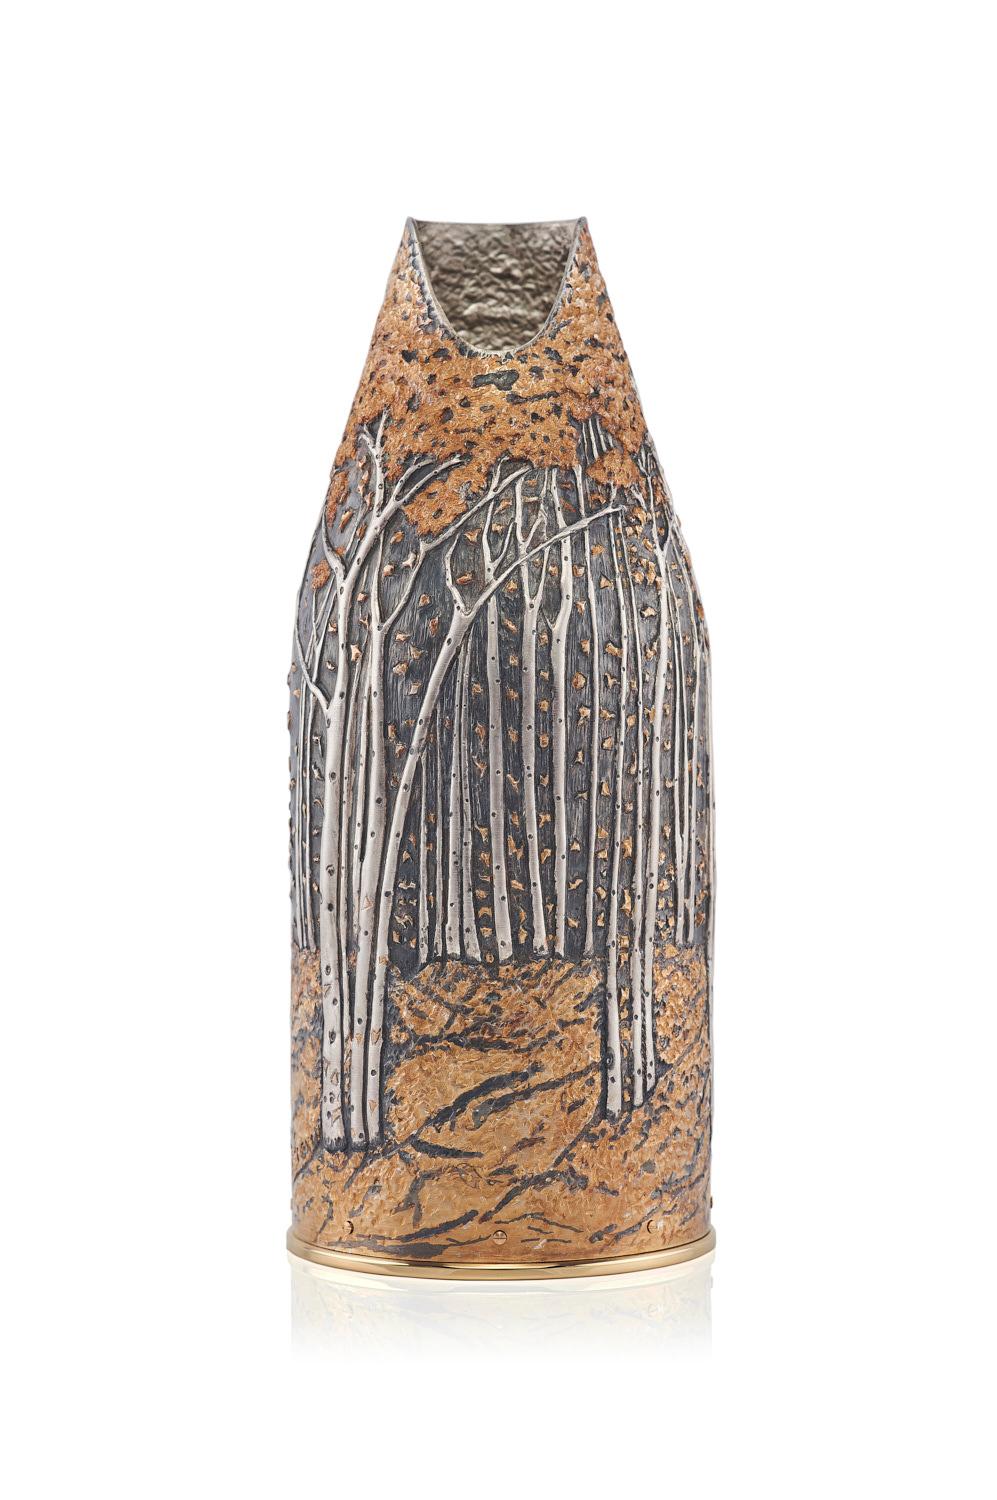 Italian K-OVER Champagne, WOOD IN AUTUMN, silver 999/°°, Italy For Sale